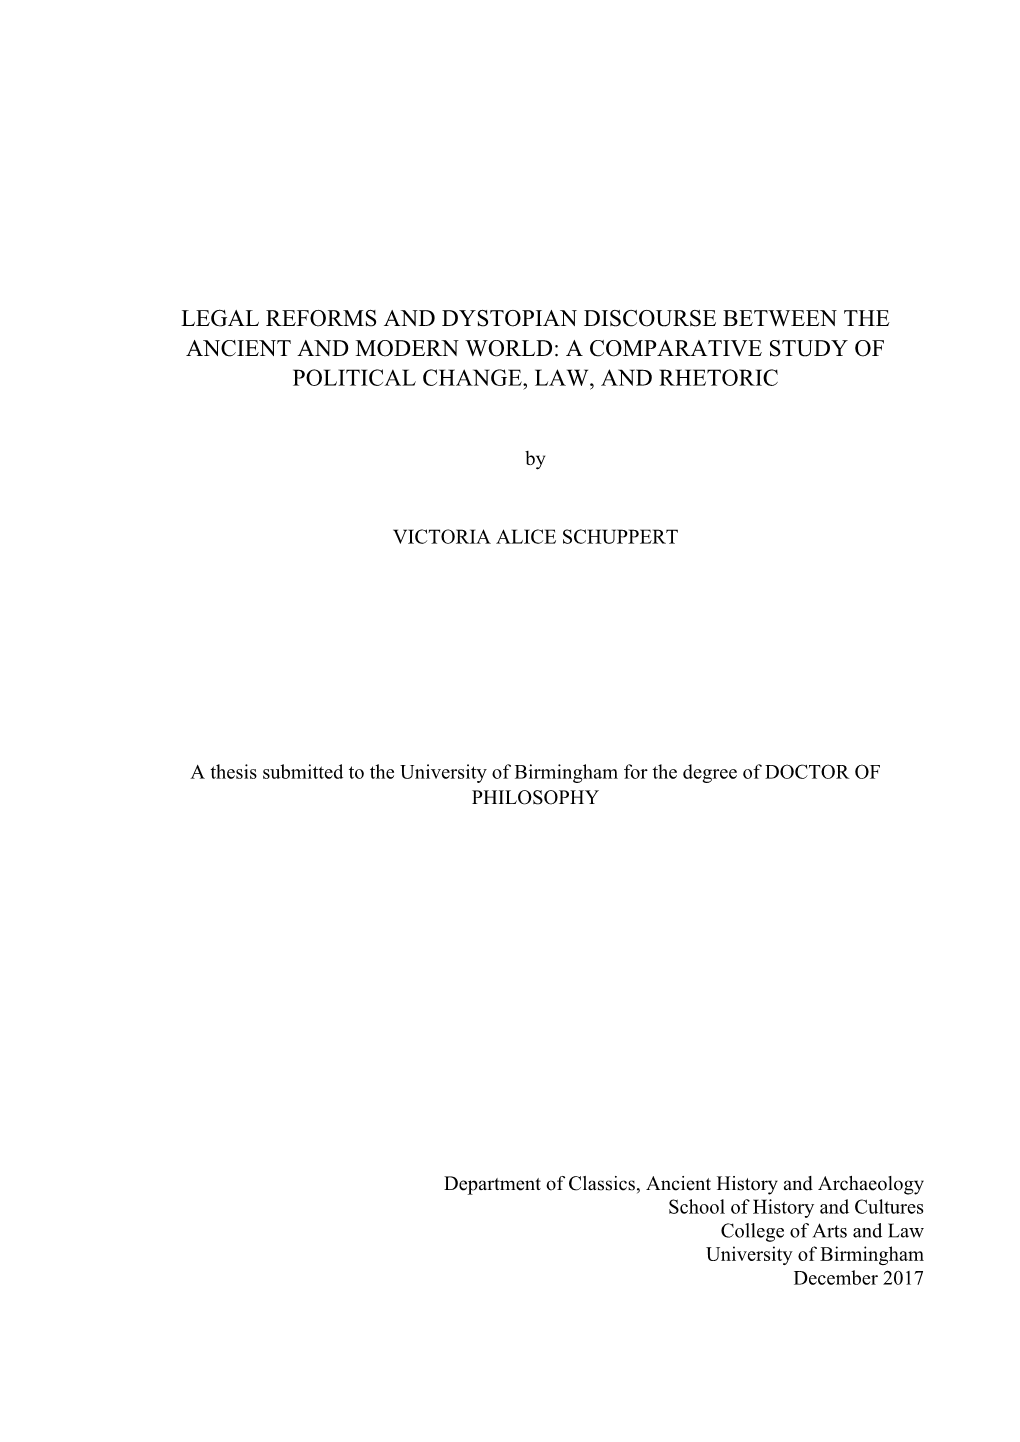 Legal Reforms and Dystopian Discourse Between the Ancient and Modern World: a Comparative Study of Political Change, Law, and Rhetoric